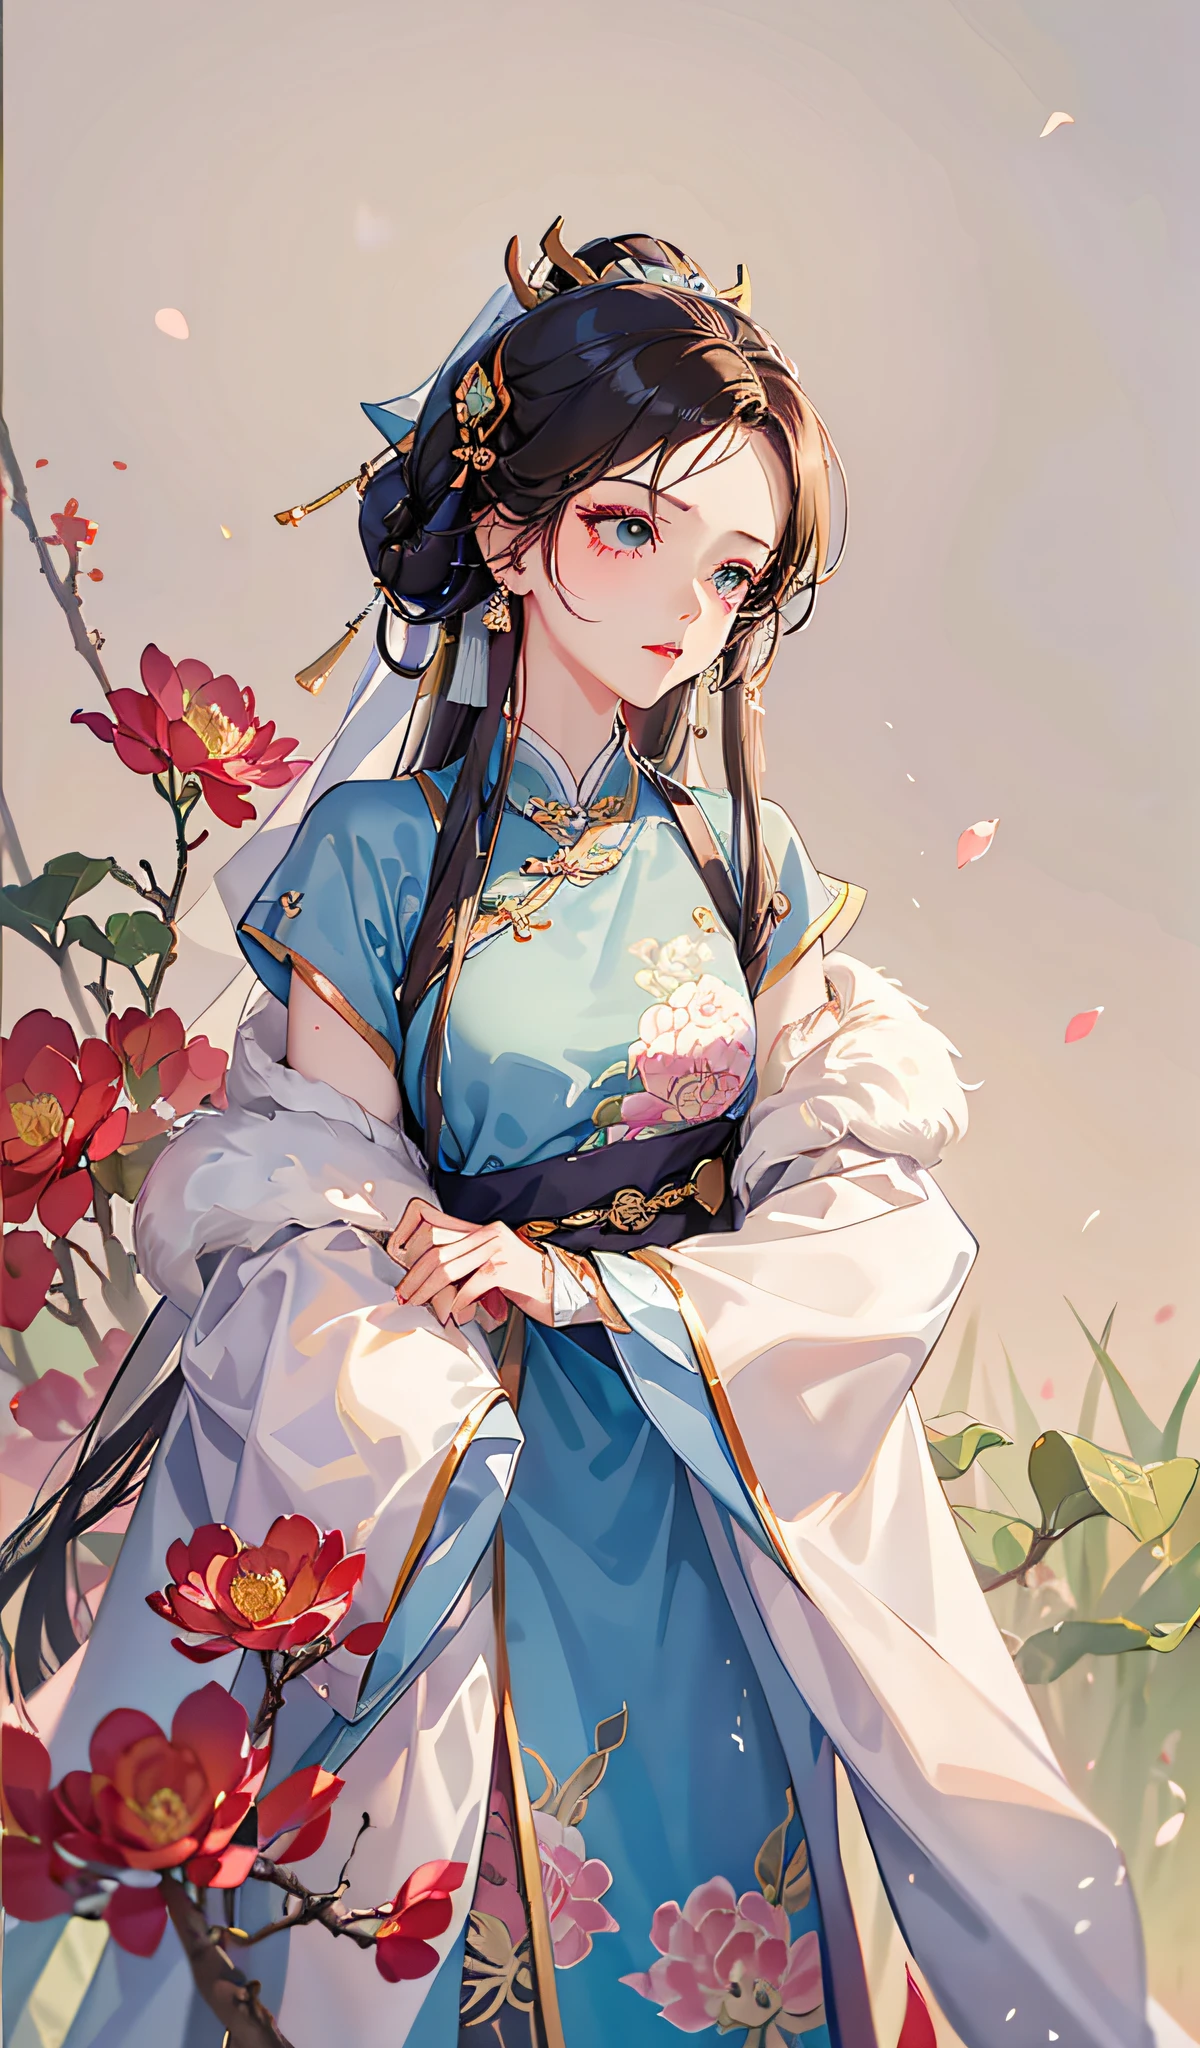 1girll， Wear Hanfu， Lotus leaf， Best quality， Master， （full bodyesbian：1）， Tall， Nice face， hair adornments， （middlebreast： 1.8） （solo：1）， looking at viewert， Lips， shift dresses， Order of healing， choker necklace， jewely， （ridiculous long hair： 1.4）， Ear ring， Hanfu， buliding， east asian architecture， Hanfu， （hentail realism：1.5）， Ultra-high resolution， best qualtiy， Shameful blush， Hairline， Arms behind， （Expressive hair：1.4） ，Perfect body proportions，Seven shows ，Sword in hand，a white long skirt，Daughter，Short sword in hand，（An extremely delicate and beautiful work），Best picture quality，A masterpiece，Cherry blossom rain，the cherry trees，with petals falling，The face is clear，（Exquisite facial features），Peerless beauty，Beautiful teenage girl，with brown eye，The highlights are obvious，High degree of completion，The details are endless，gem-like eyes，Blushlush，Fine face，Facial makeup，putting makeup on，（Very fine CG），Black coiled hair，Silver-white veil，Highest image quality，Ancient Chinese clothing，Dunhuang costumes